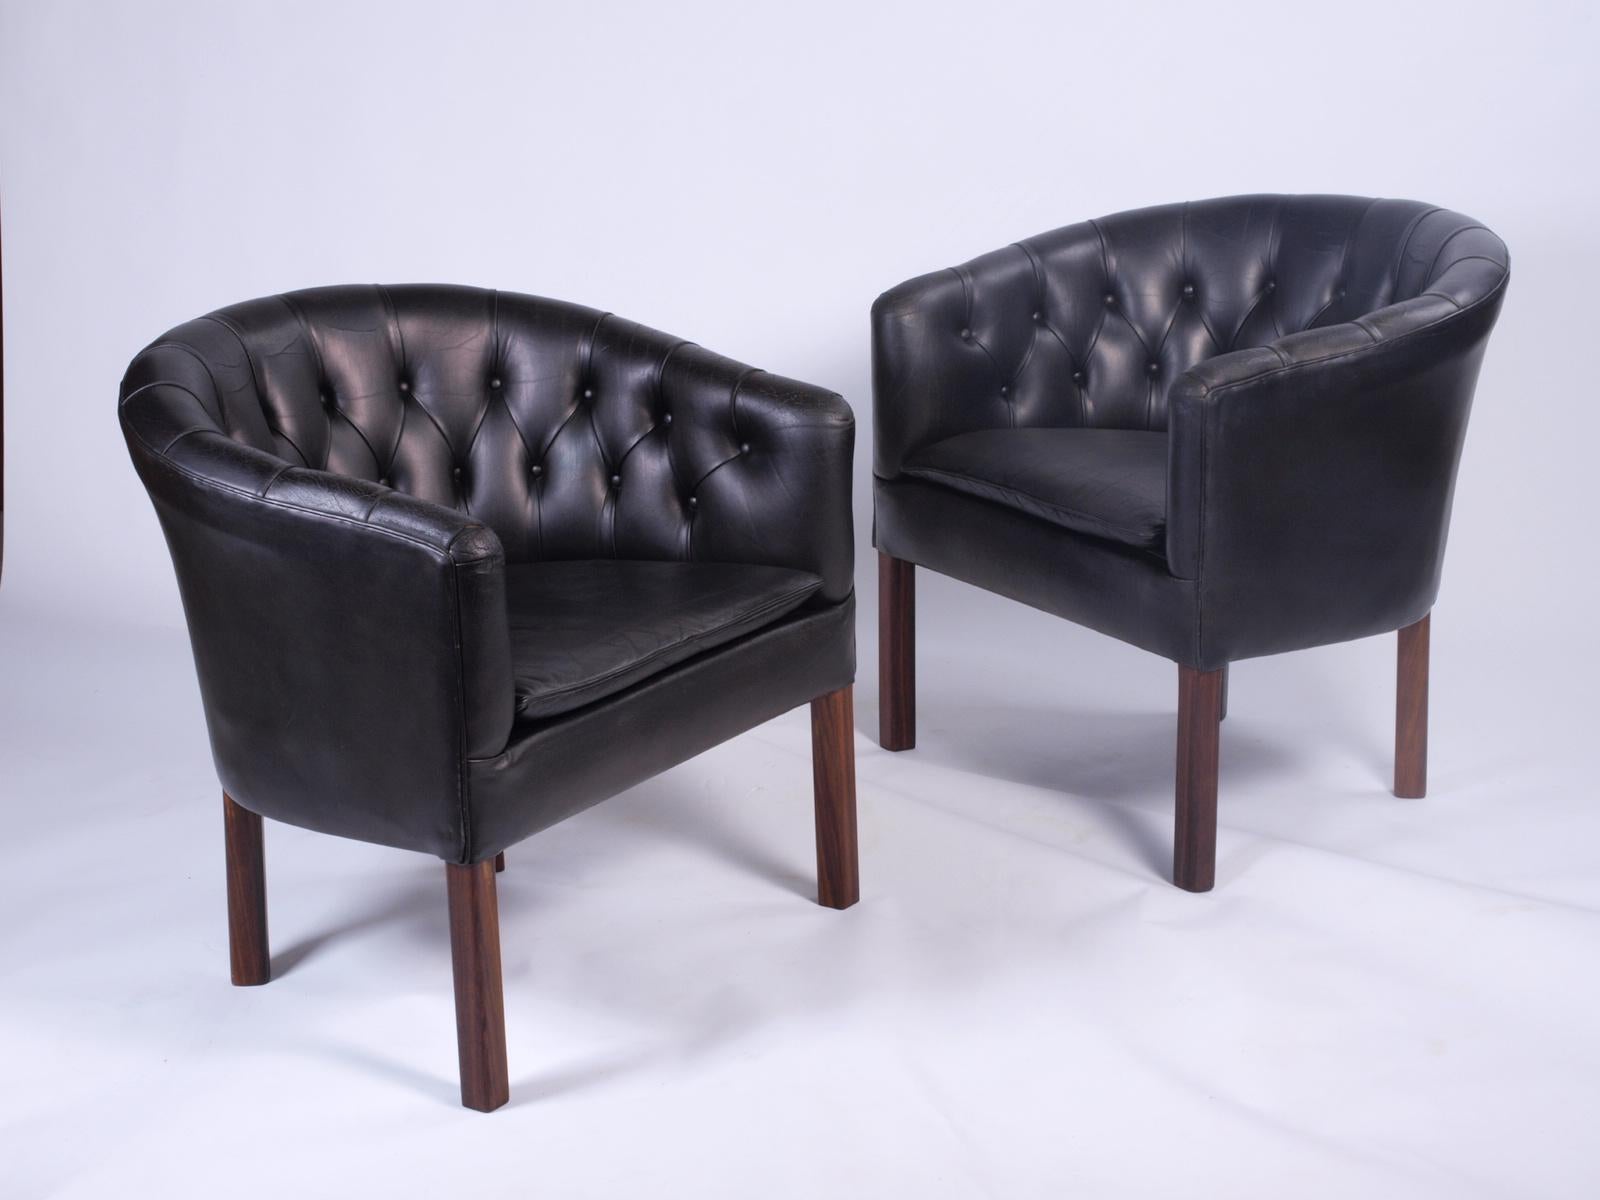 Mid-20th Century Leather Danish Lounge Chairs Attributed to Kaare Klint, Borge Mogensen